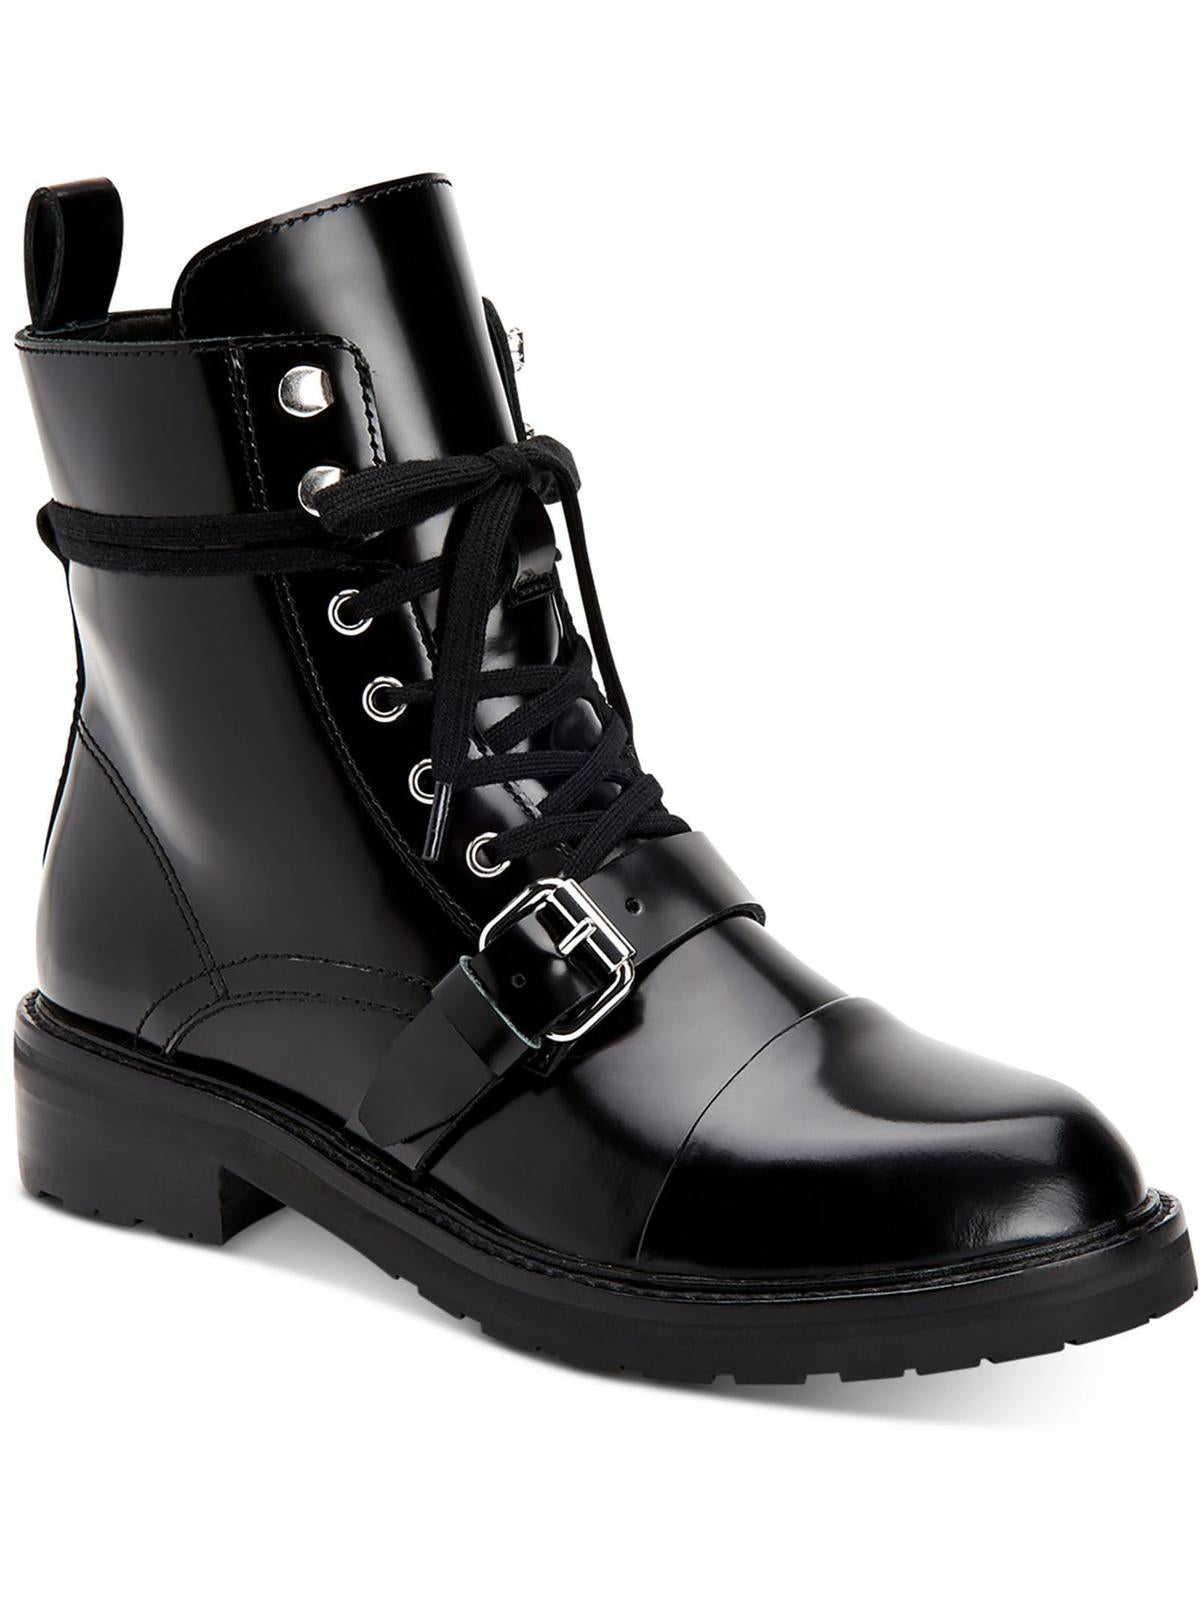 ALLSAINTS Donita  Womens Zipper Pull On Combat & Lace-up Boots